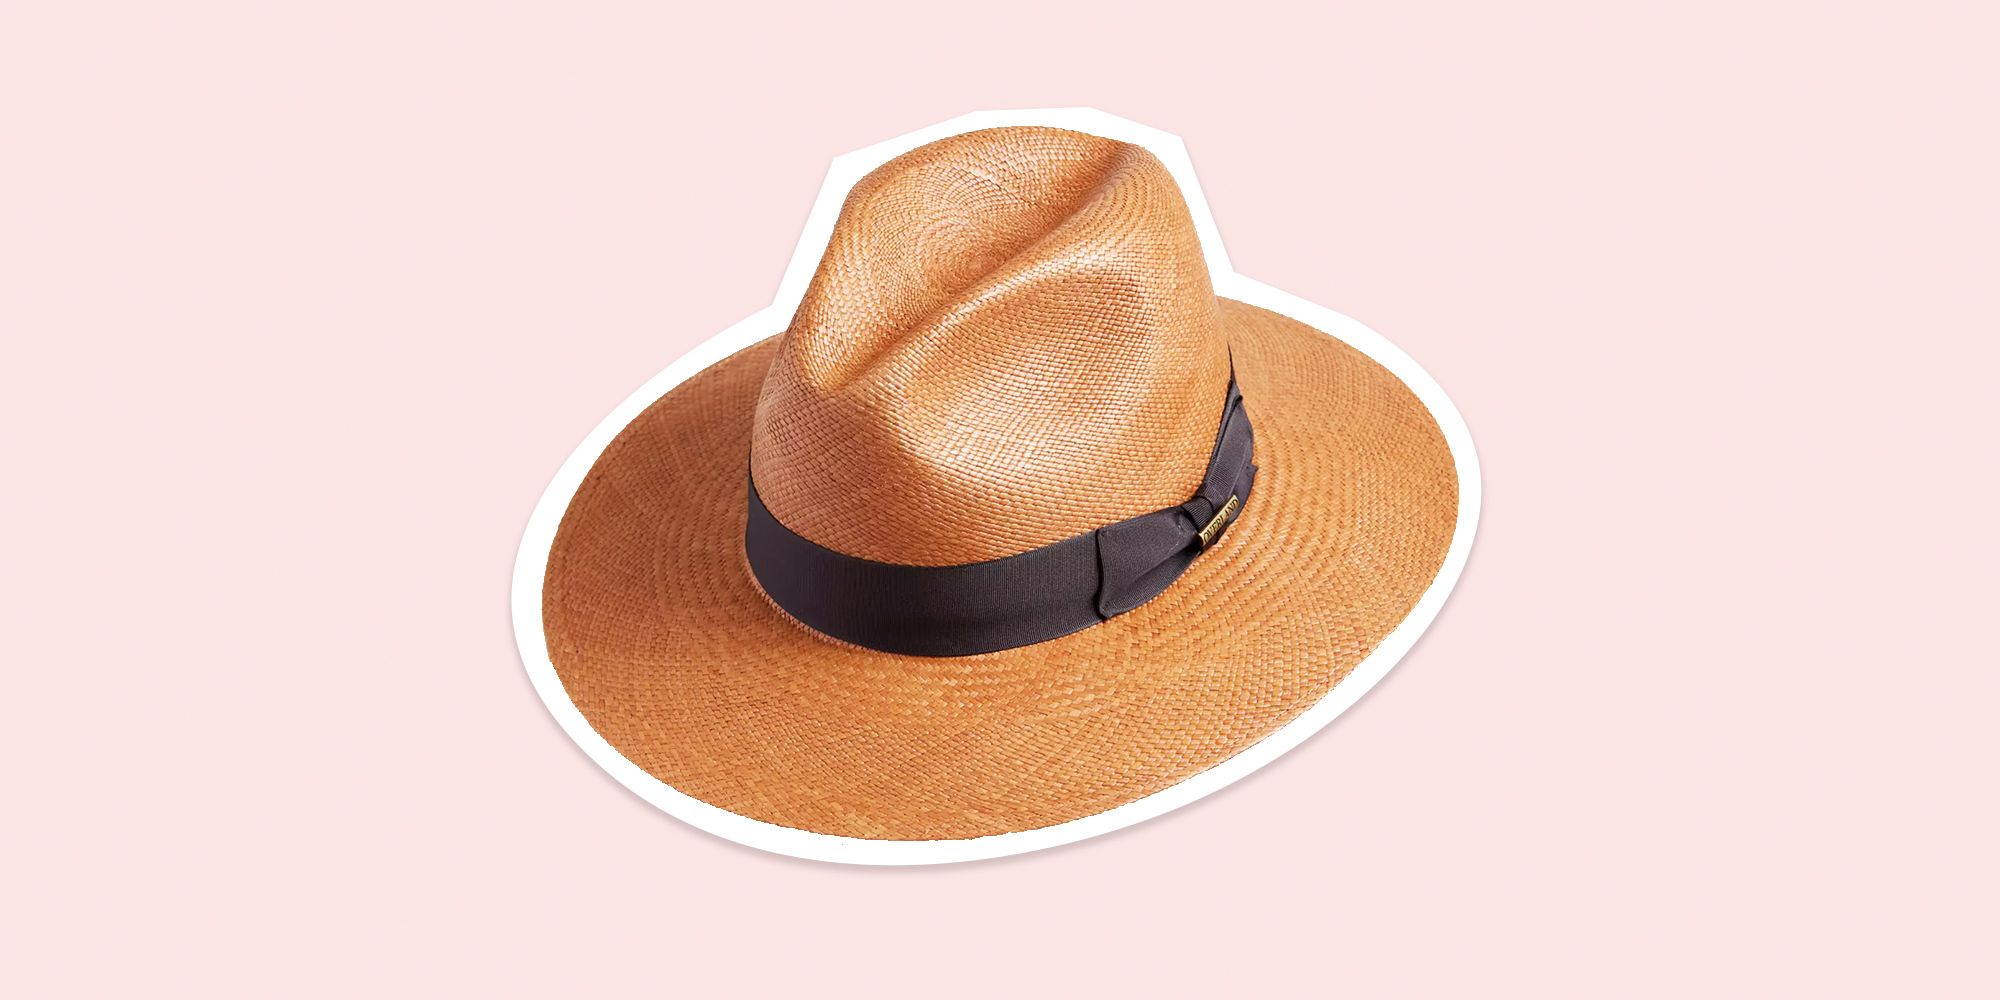 30 Best Men's Hats to Wear For Summer 2022 - What Hats to Wear For Summer